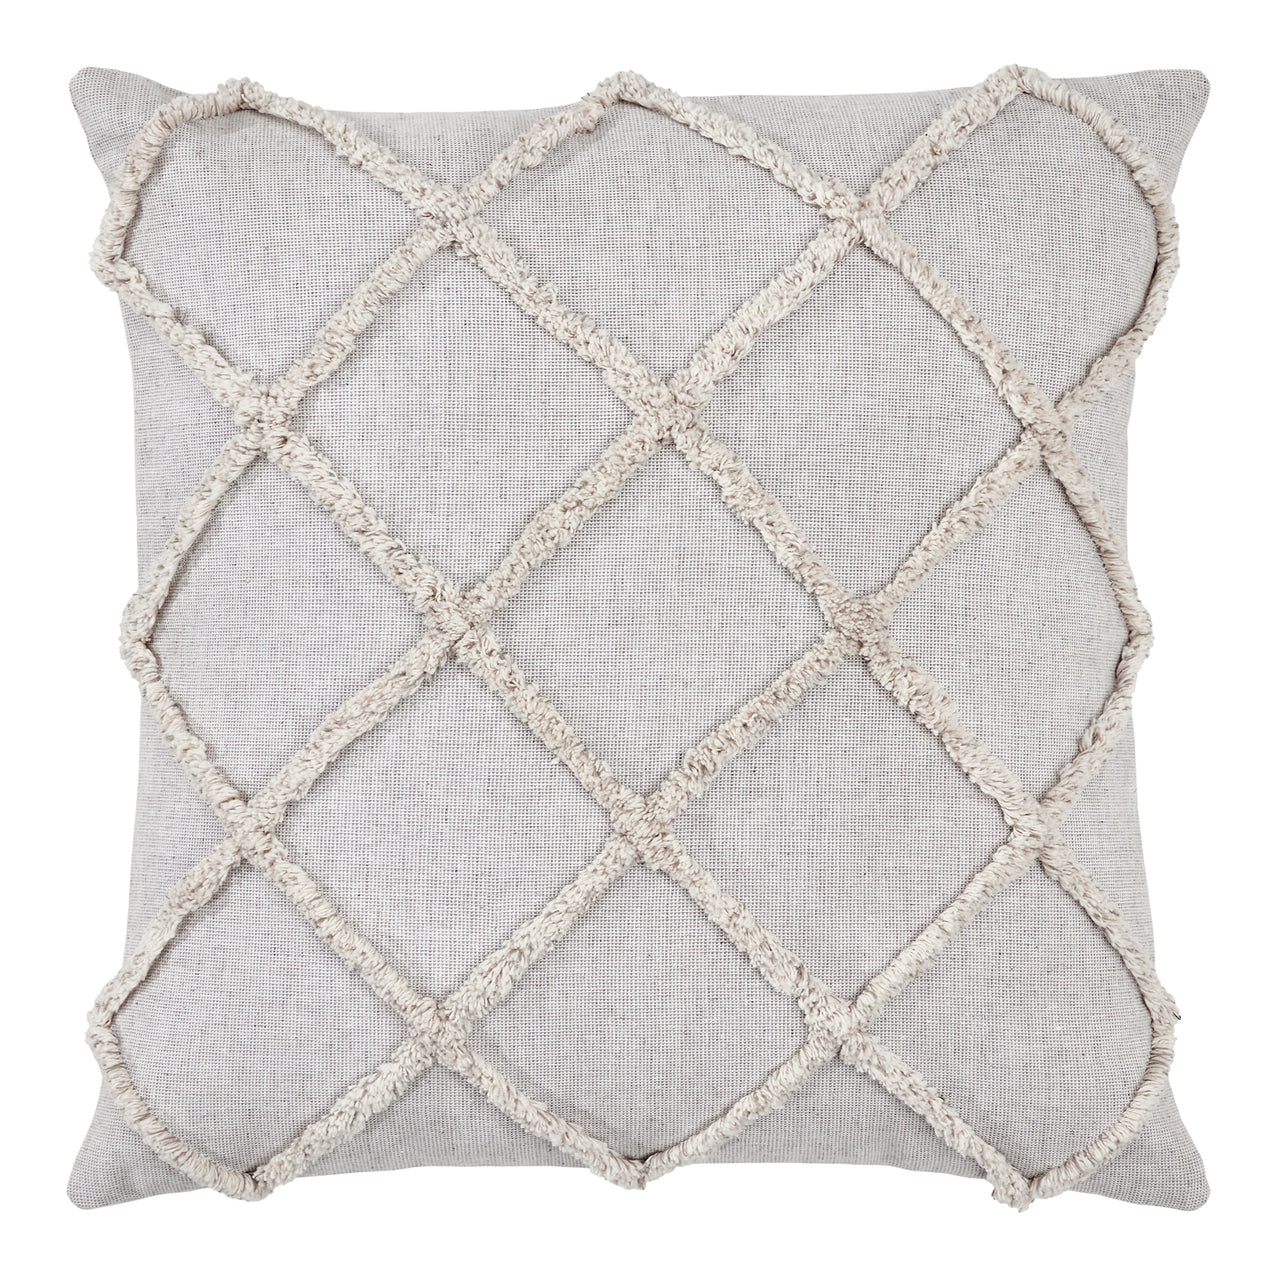 Frayed Lattice Oatmeal Pillow Cover 20x20 VHC Brands